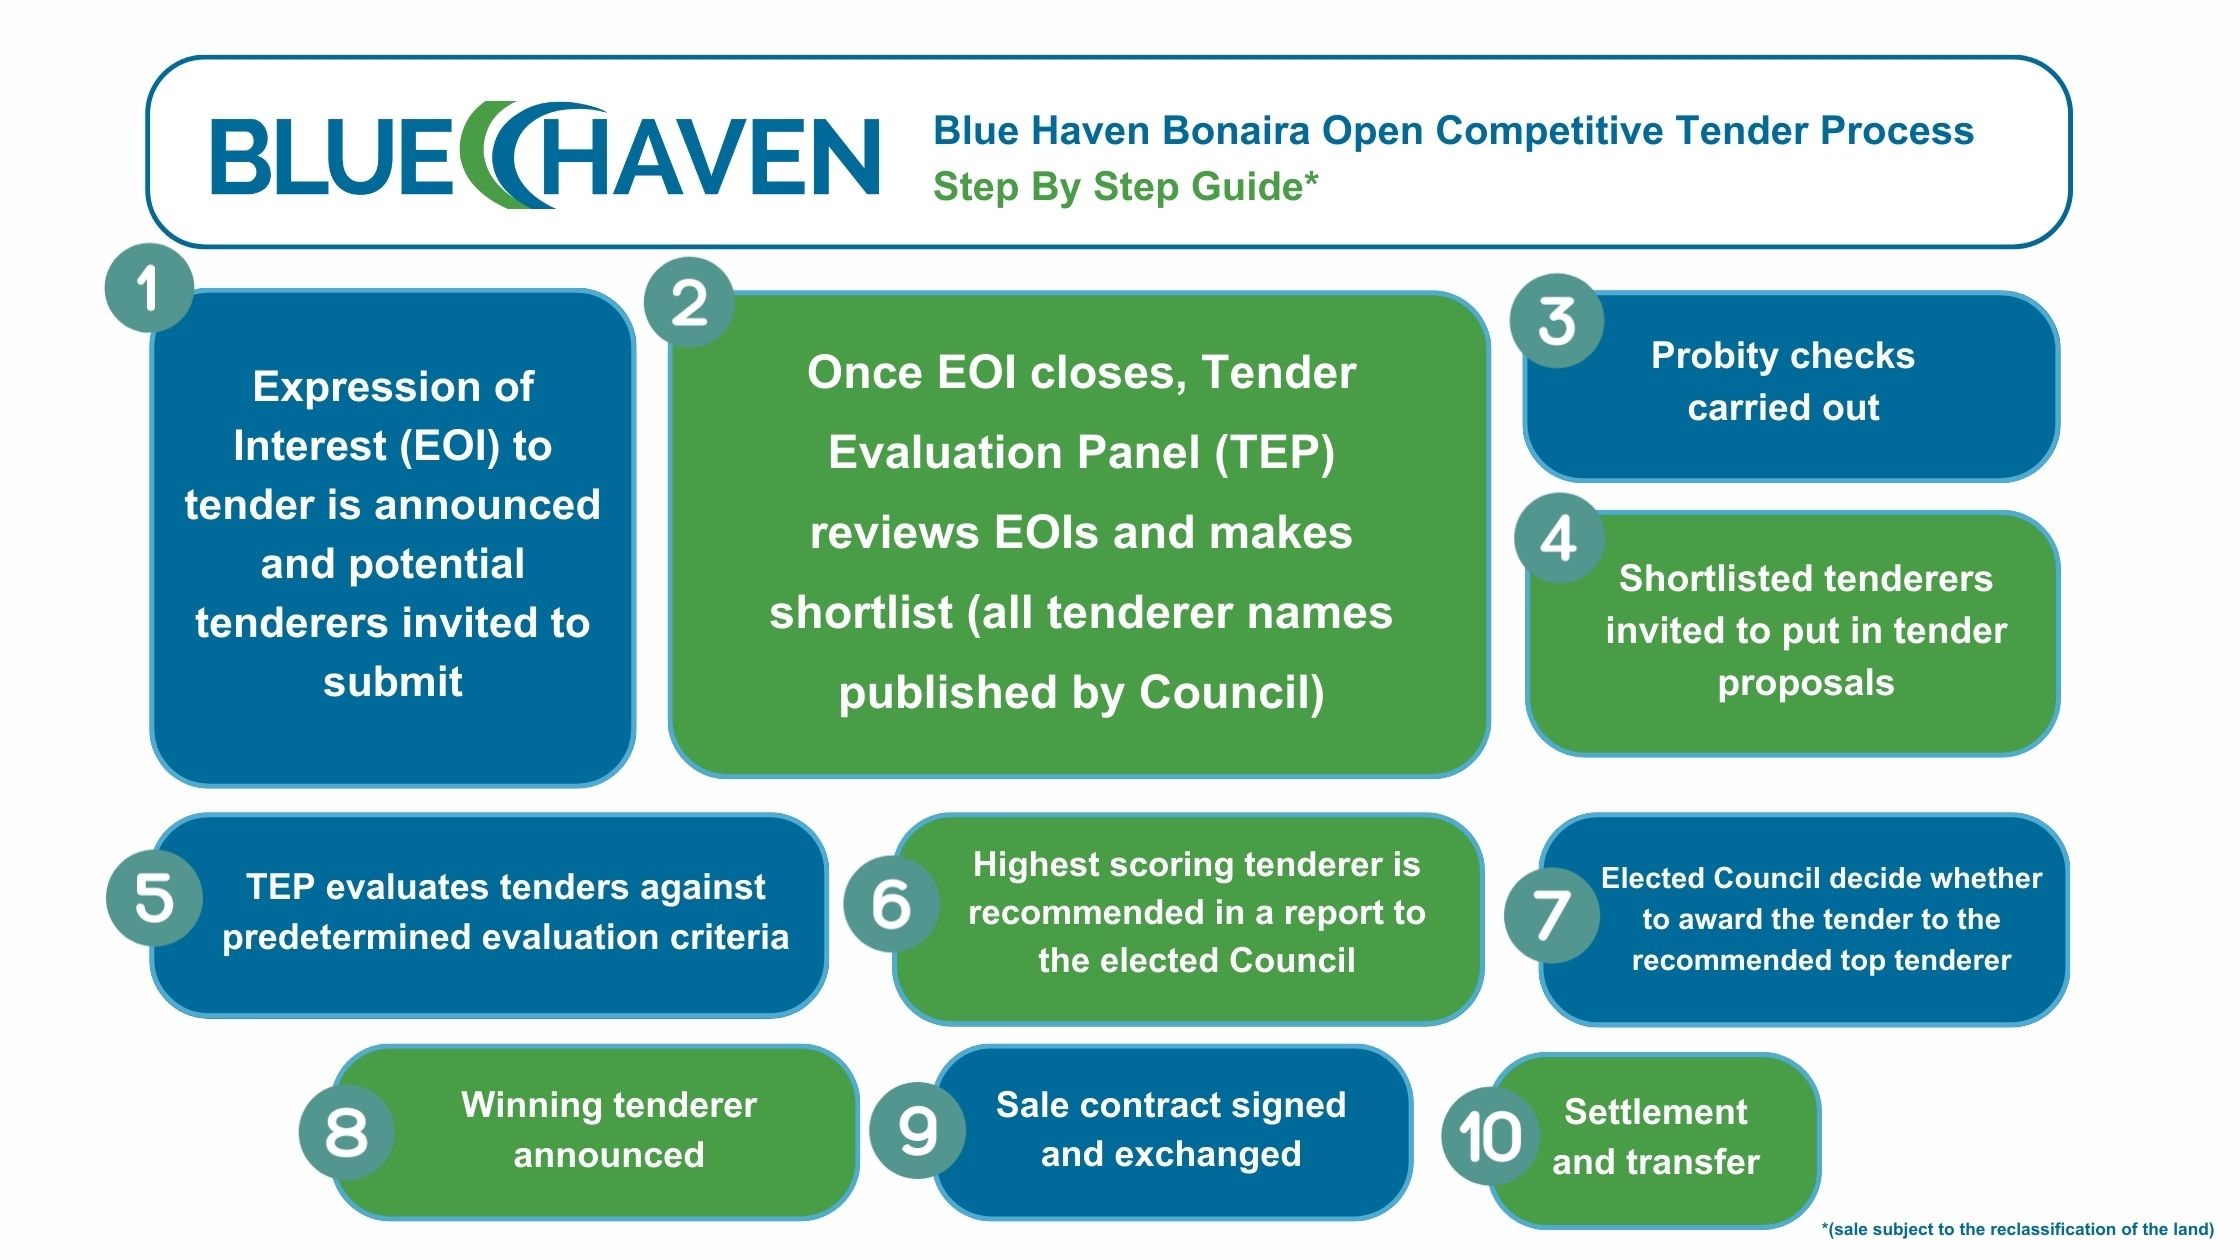 Blue-Haven-Open-Competitive-Tender-Process-Step-By-Step-Guide_FINAL.jpg